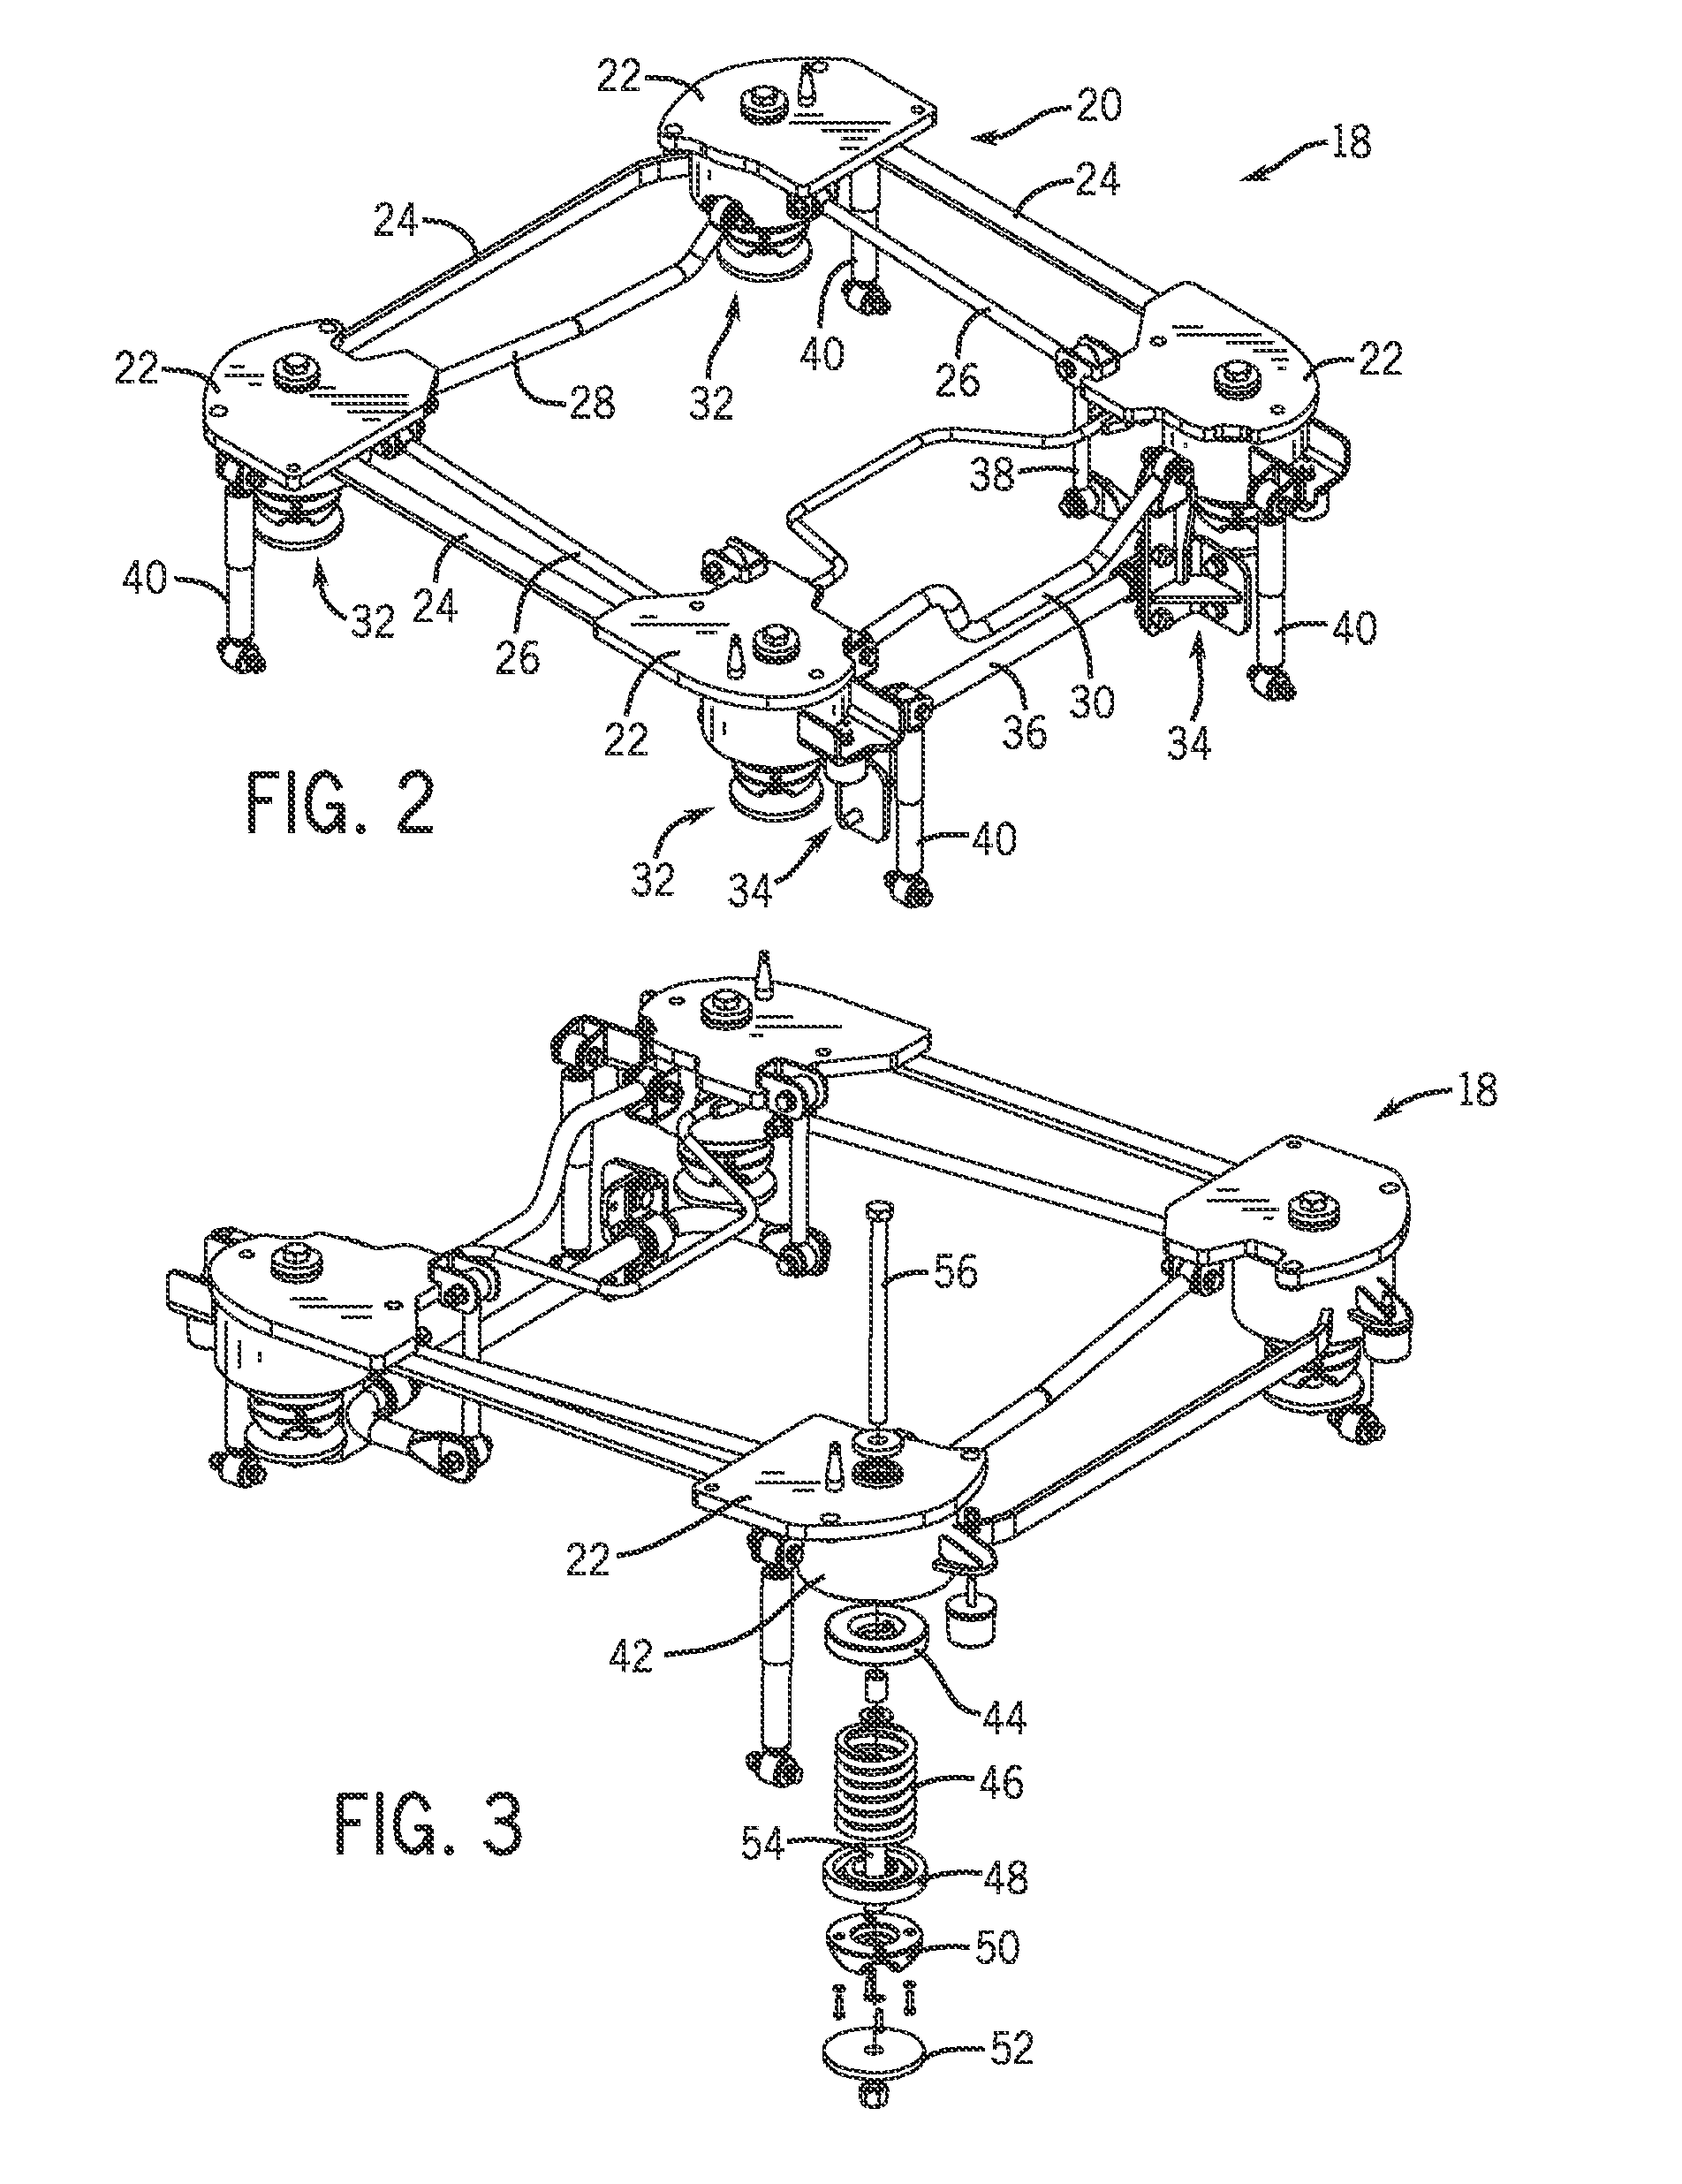 Cab suspension system for an off-road vehicle